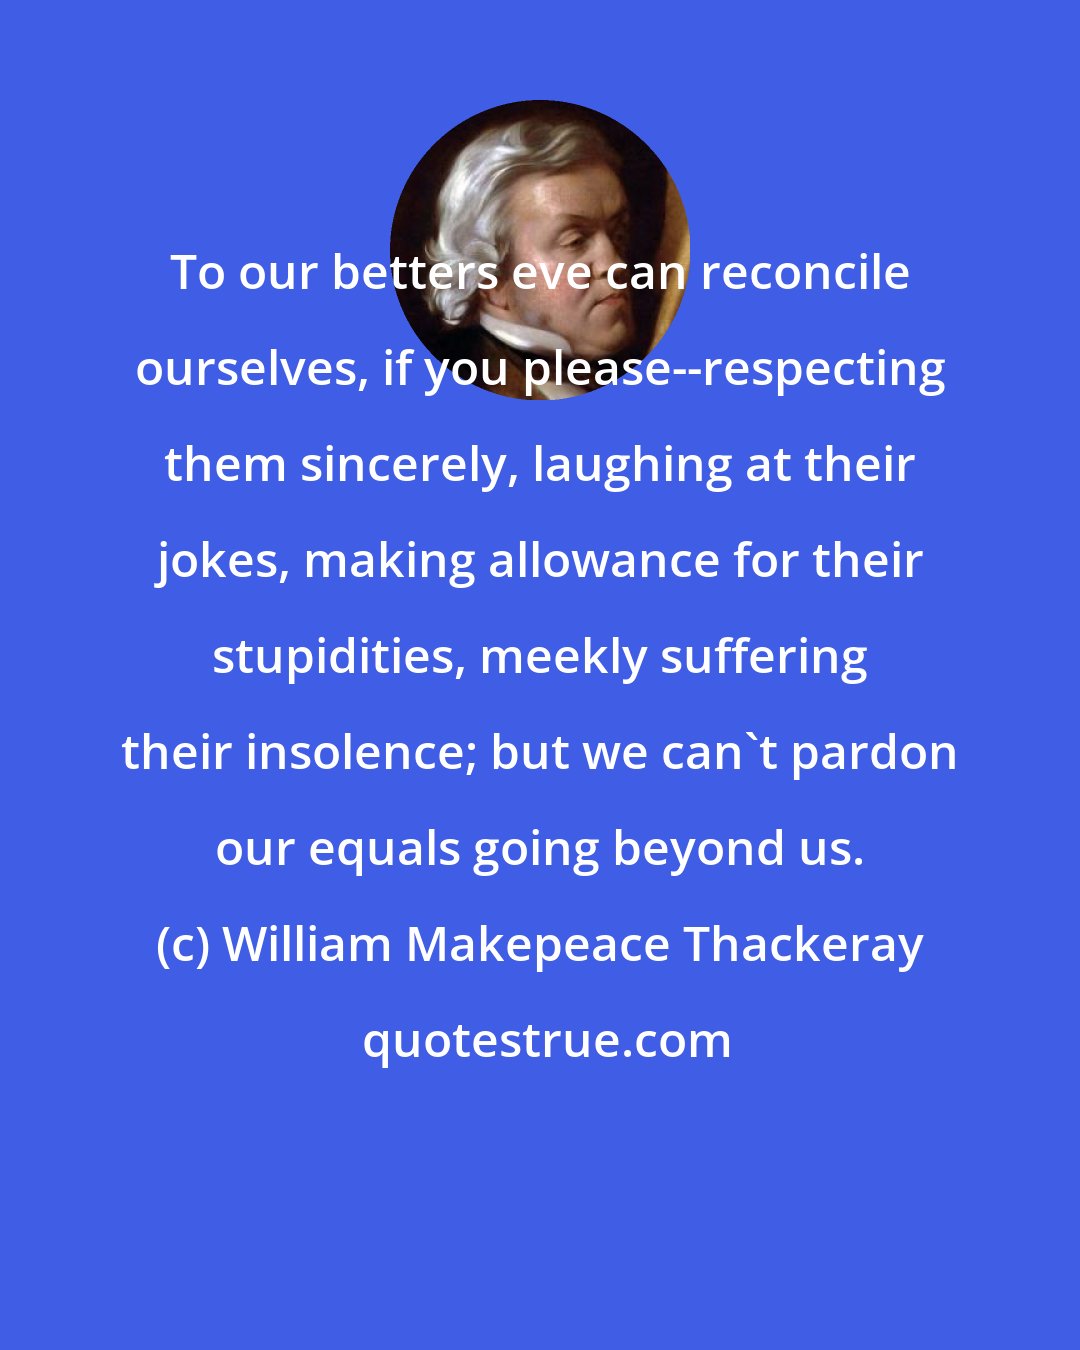 William Makepeace Thackeray: To our betters eve can reconcile ourselves, if you please--respecting them sincerely, laughing at their jokes, making allowance for their stupidities, meekly suffering their insolence; but we can't pardon our equals going beyond us.